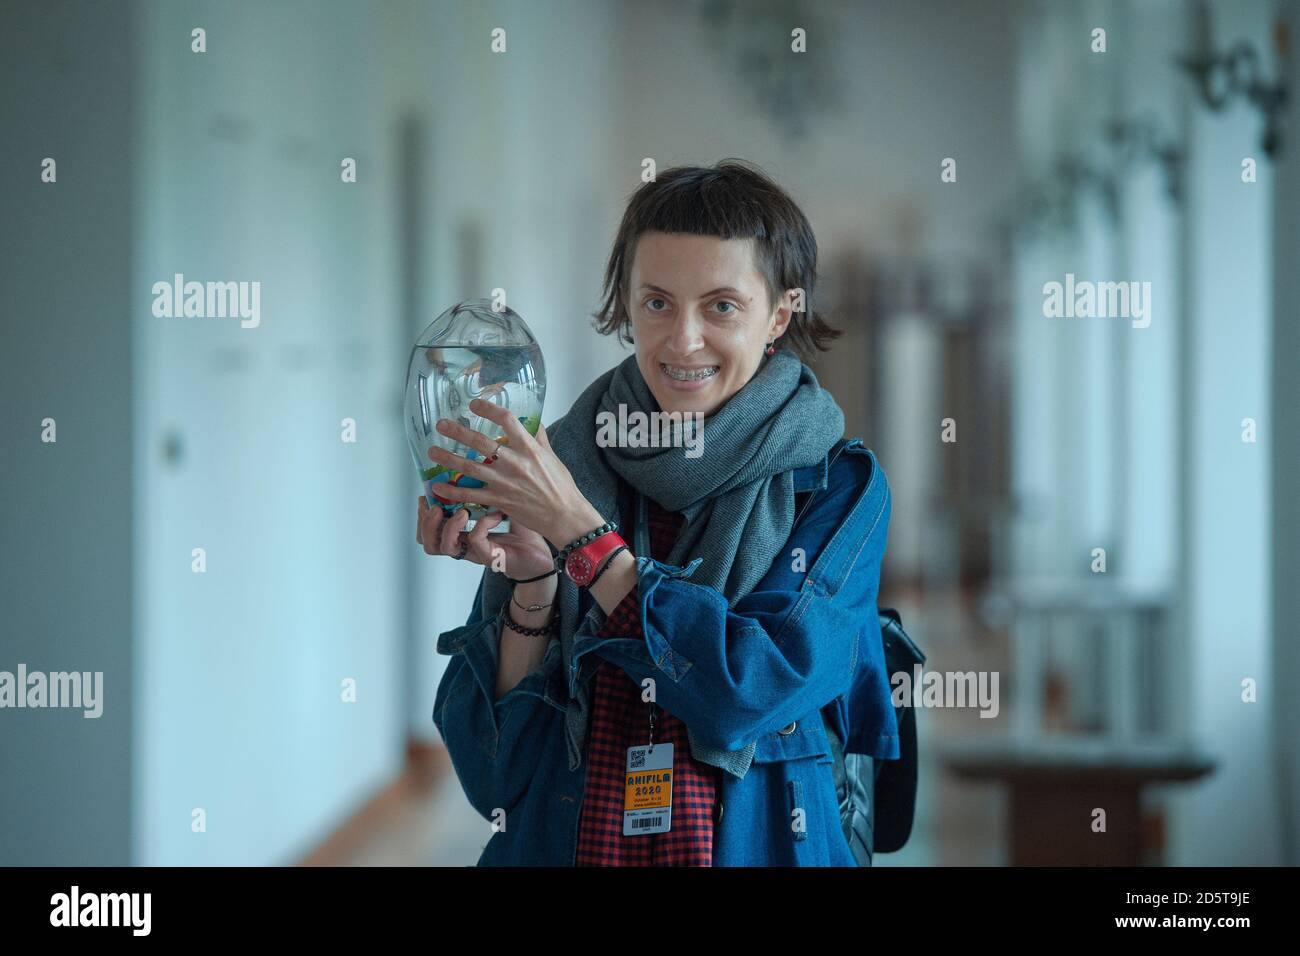 Liberec, Czech Republic. 10th Oct, 2020. Director Daria Kashcheeva won the  International Festival of Animated Films main prize for her animated film  Daughter on October 10, 2020. This Academy Award nominated and